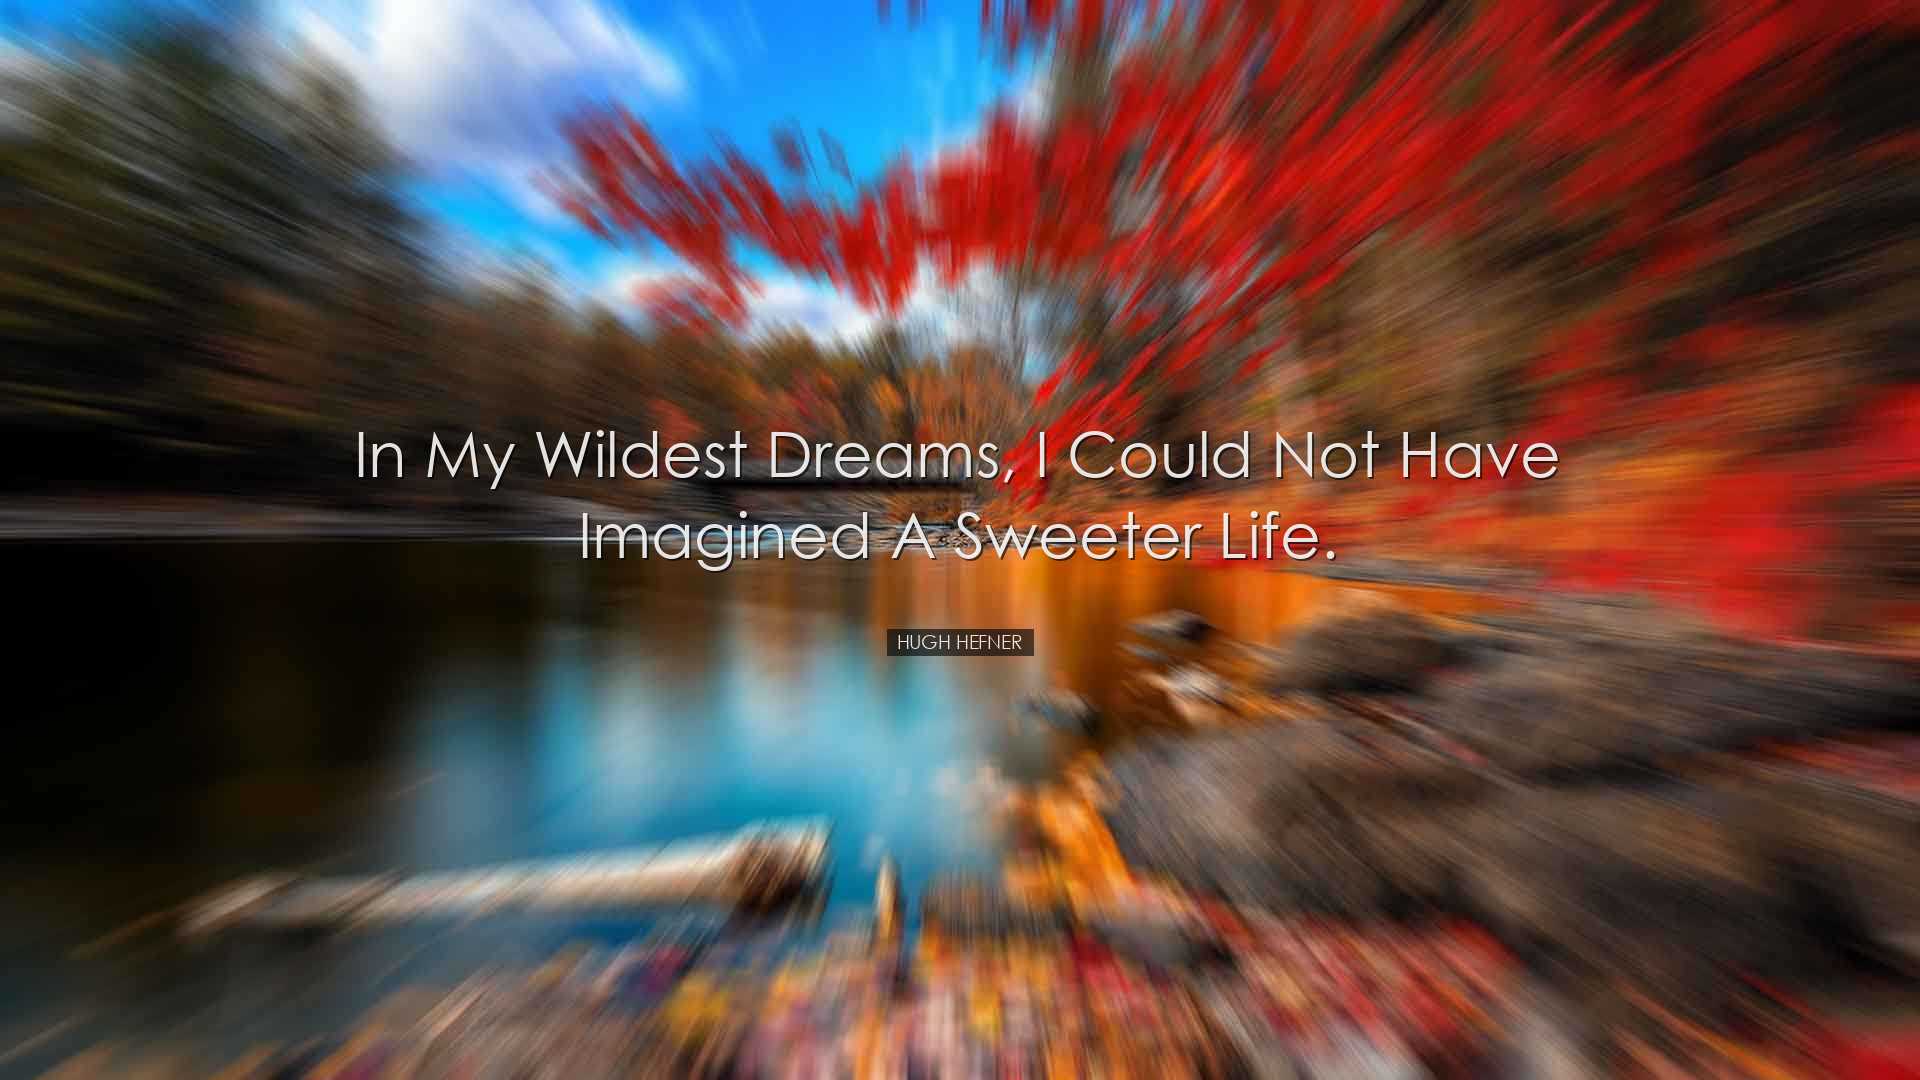 In my wildest dreams, I could not have imagined a sweeter life. -